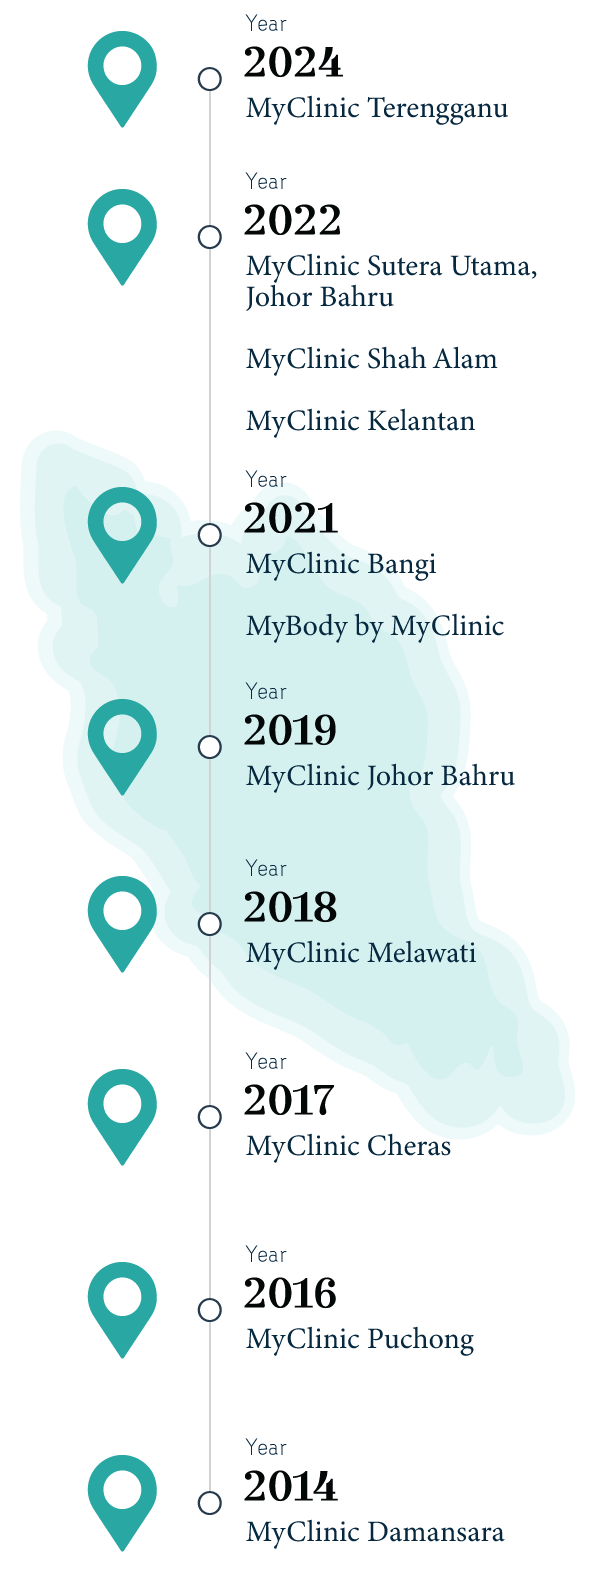 MyClinic list of Branches throughout the years